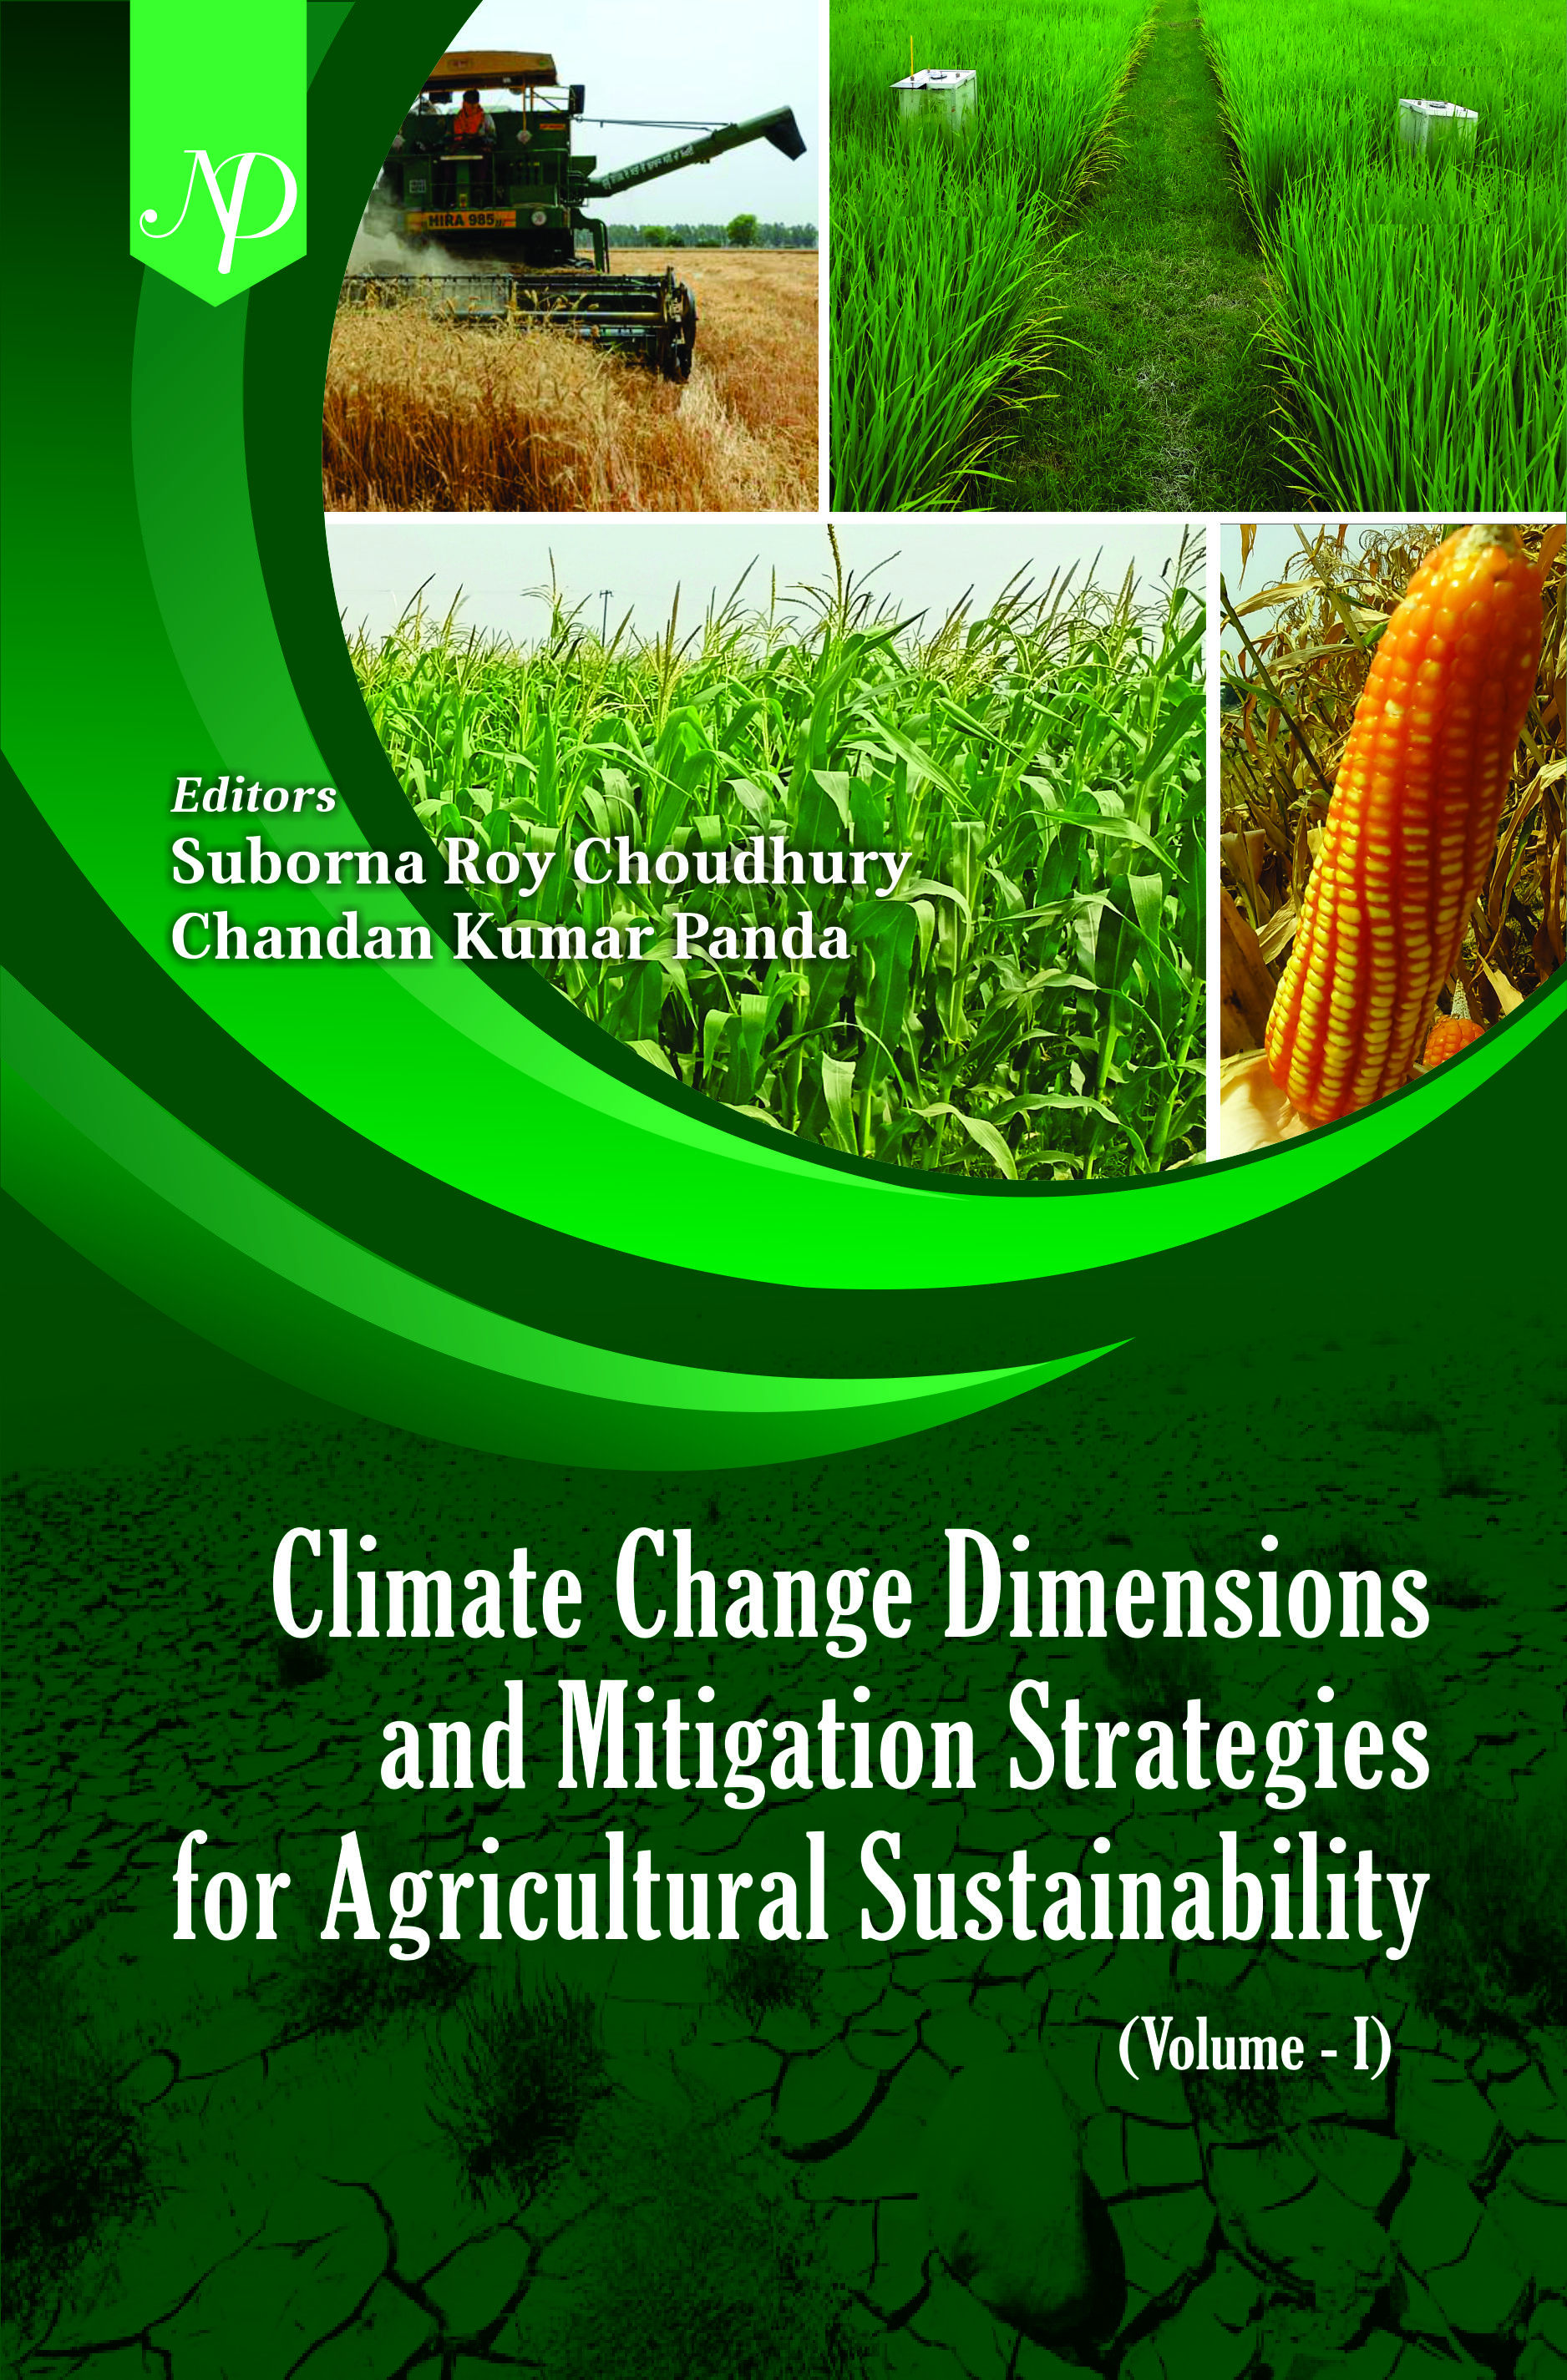 Climate Change Dimensions and Mitigation Strategies for Agricultural Sustainability Vol 1